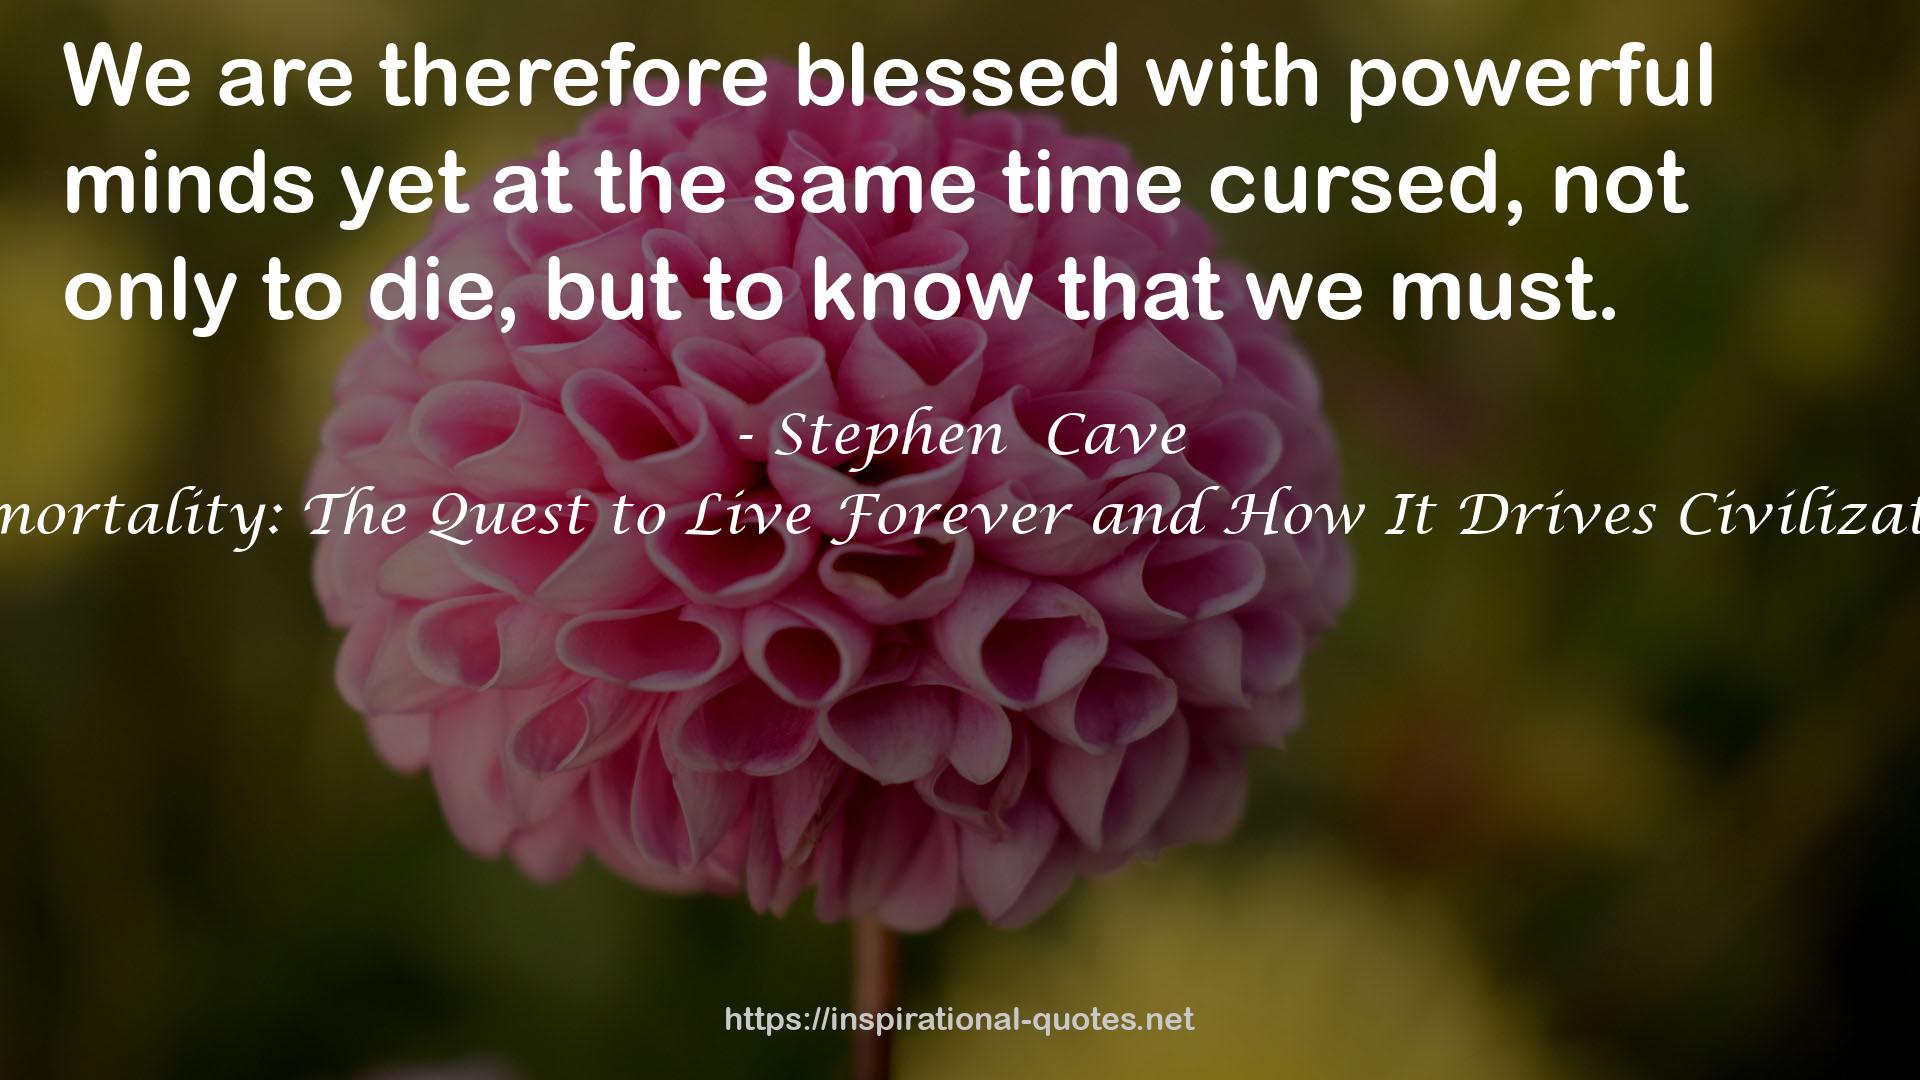 Stephen  Cave QUOTES